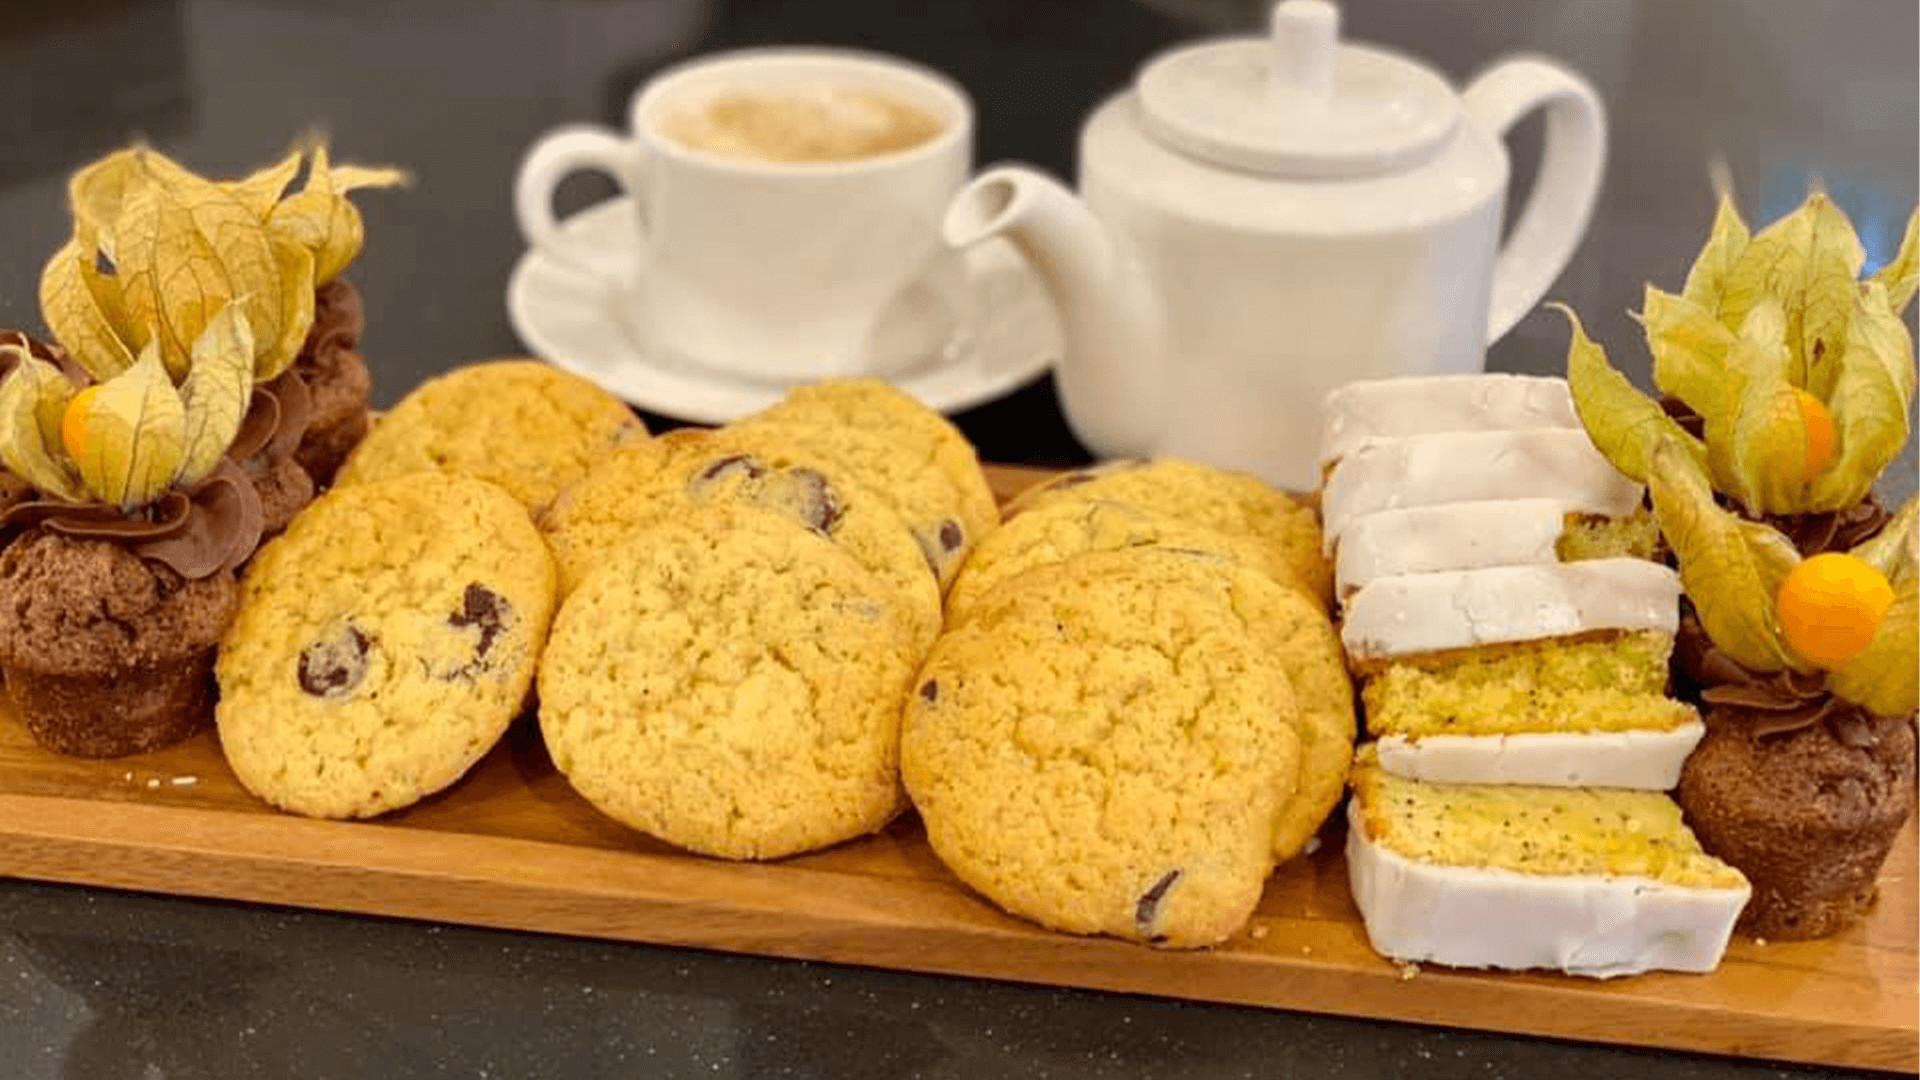 Avonmere biscuits